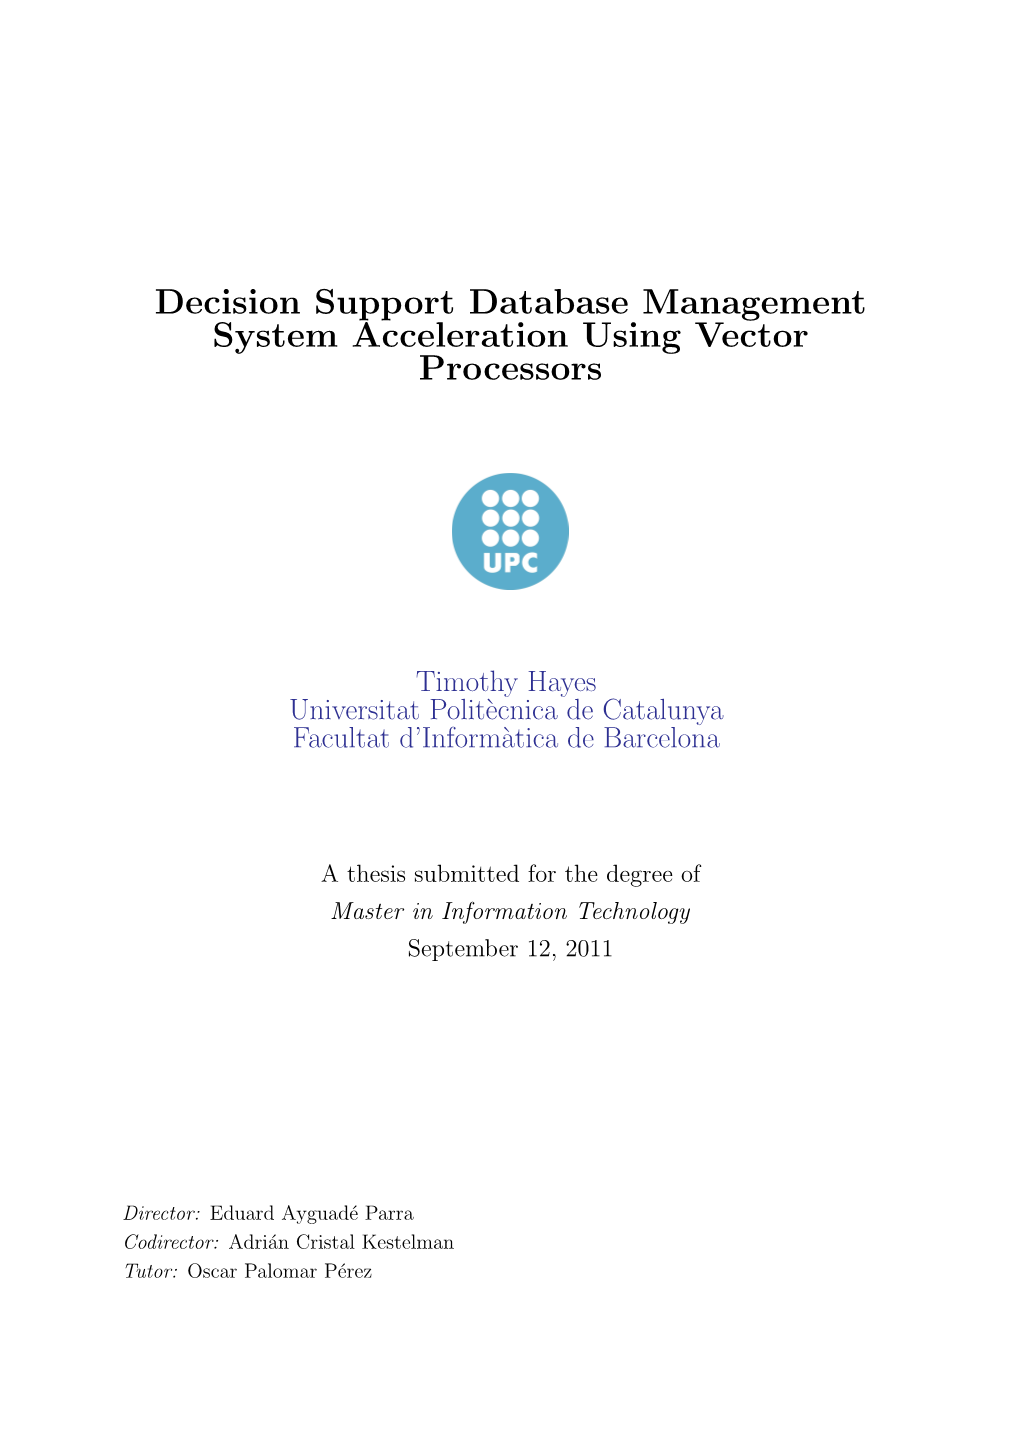 Decision Support Database Management System Acceleration Using Vector Processors